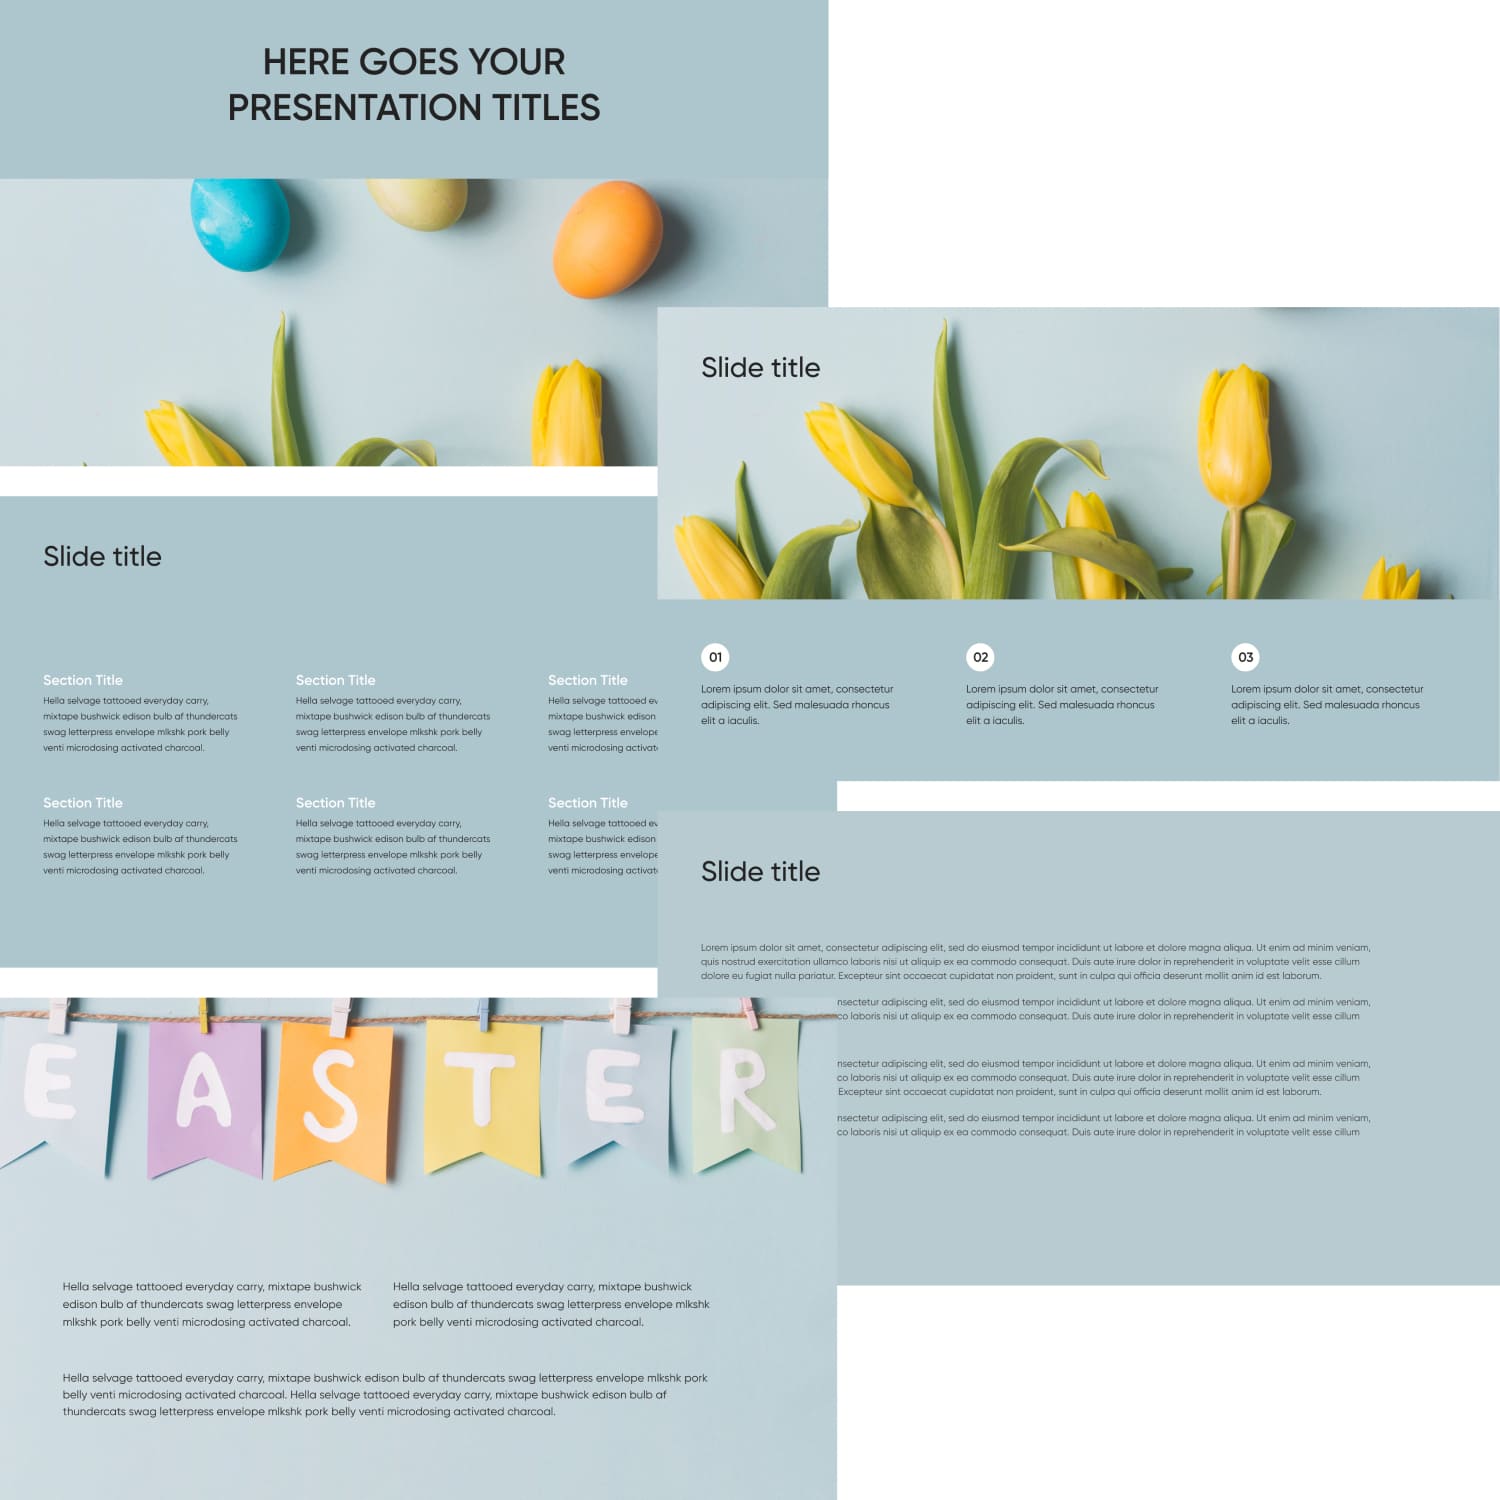 Free Easter Powerpoint Template 1500x1500 2.